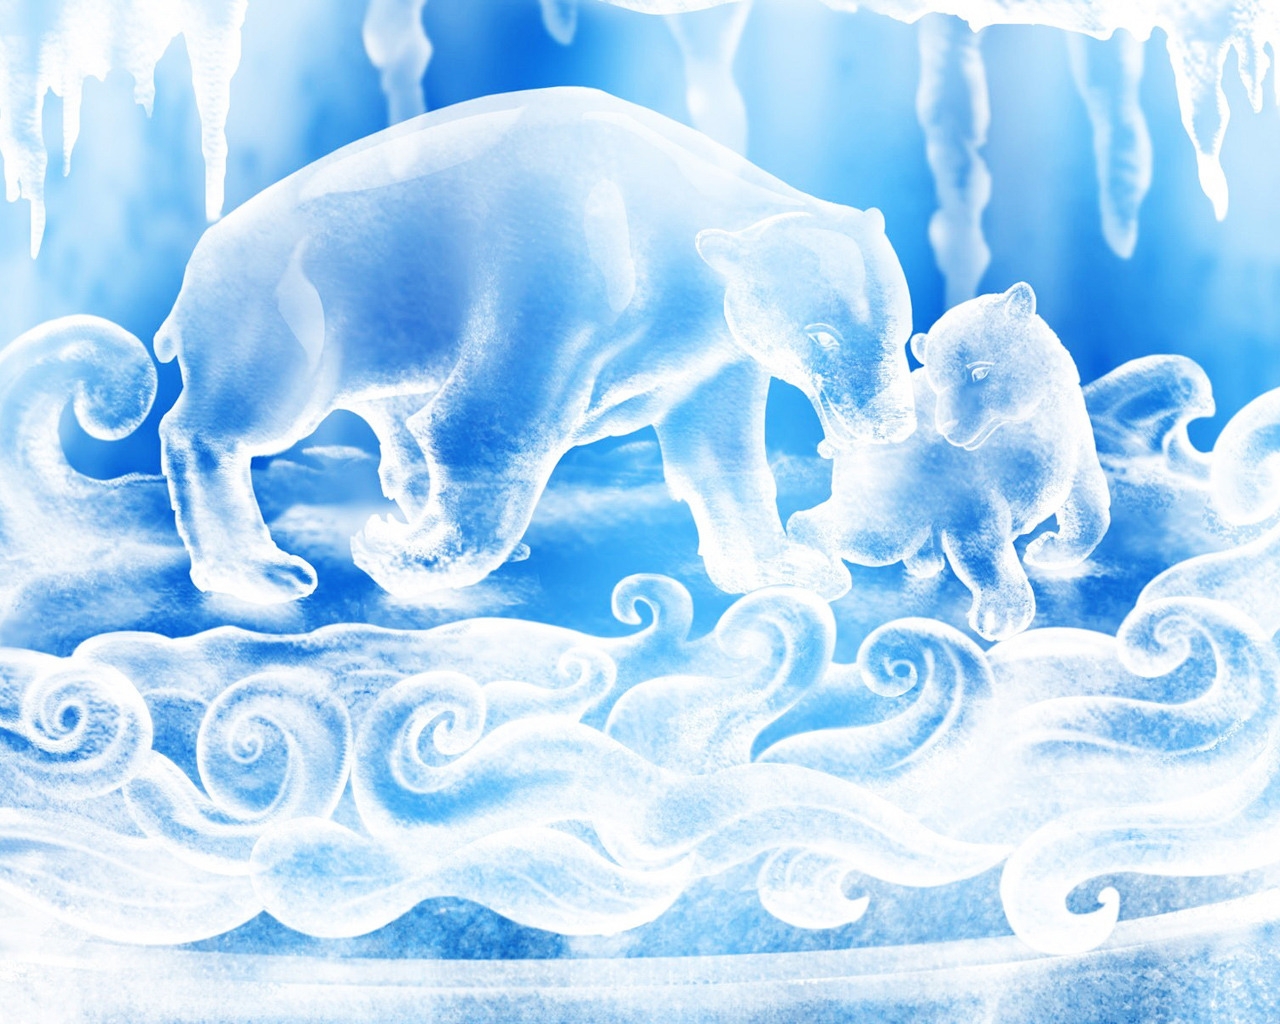 Bears Carved From Ice for 1280 x 1024 resolution